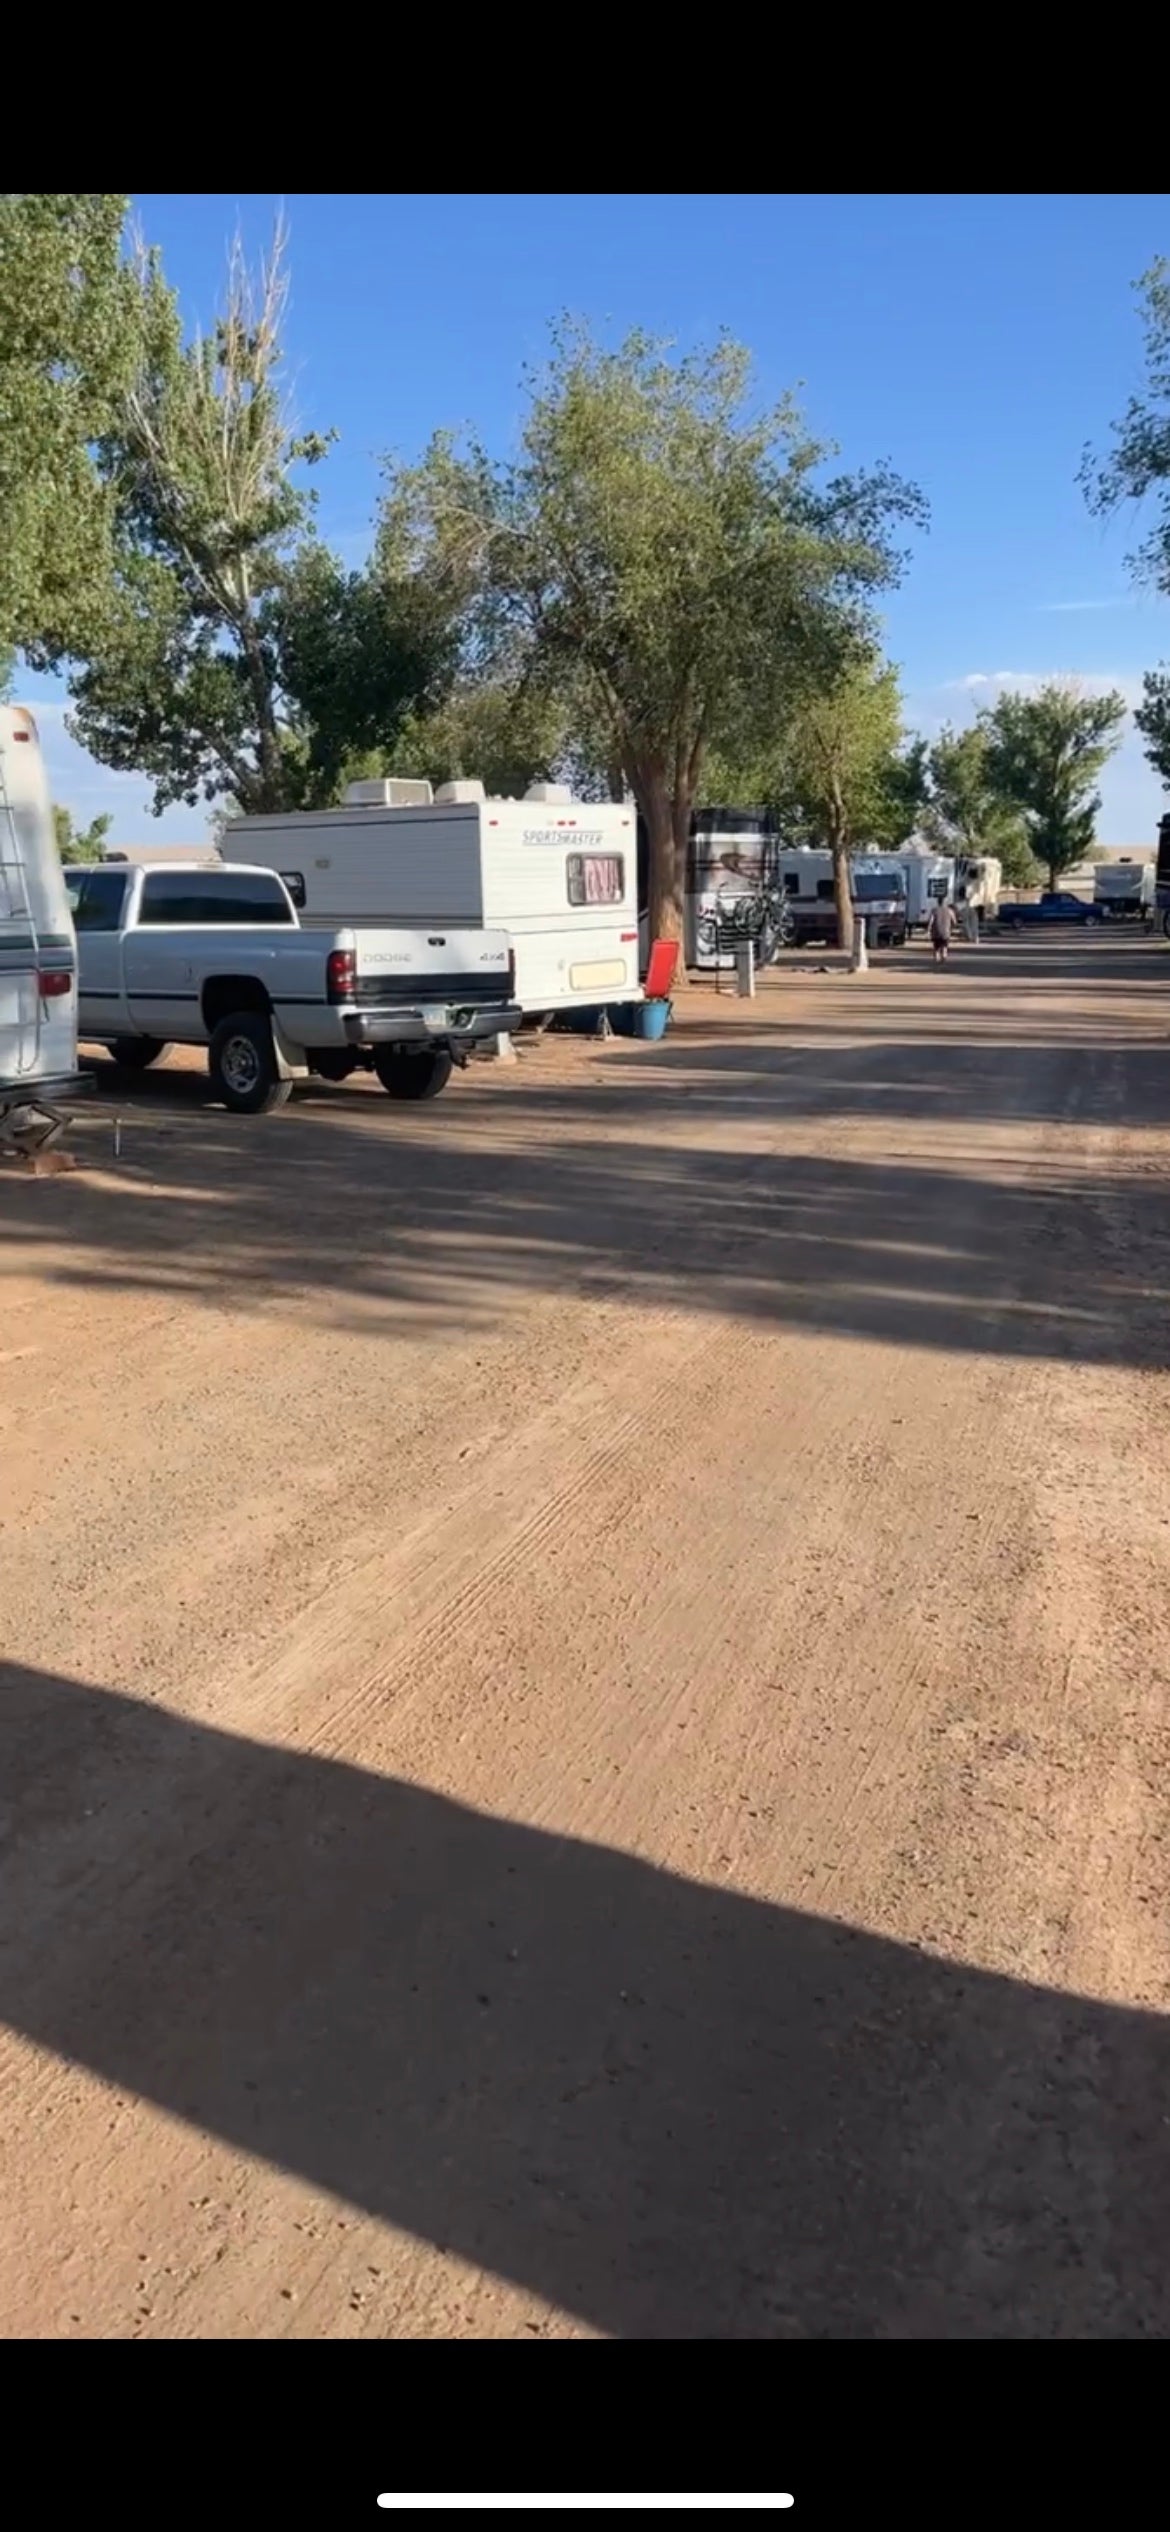 Camper submitted image from Quality Inn Navajo Nation RV Park - 2